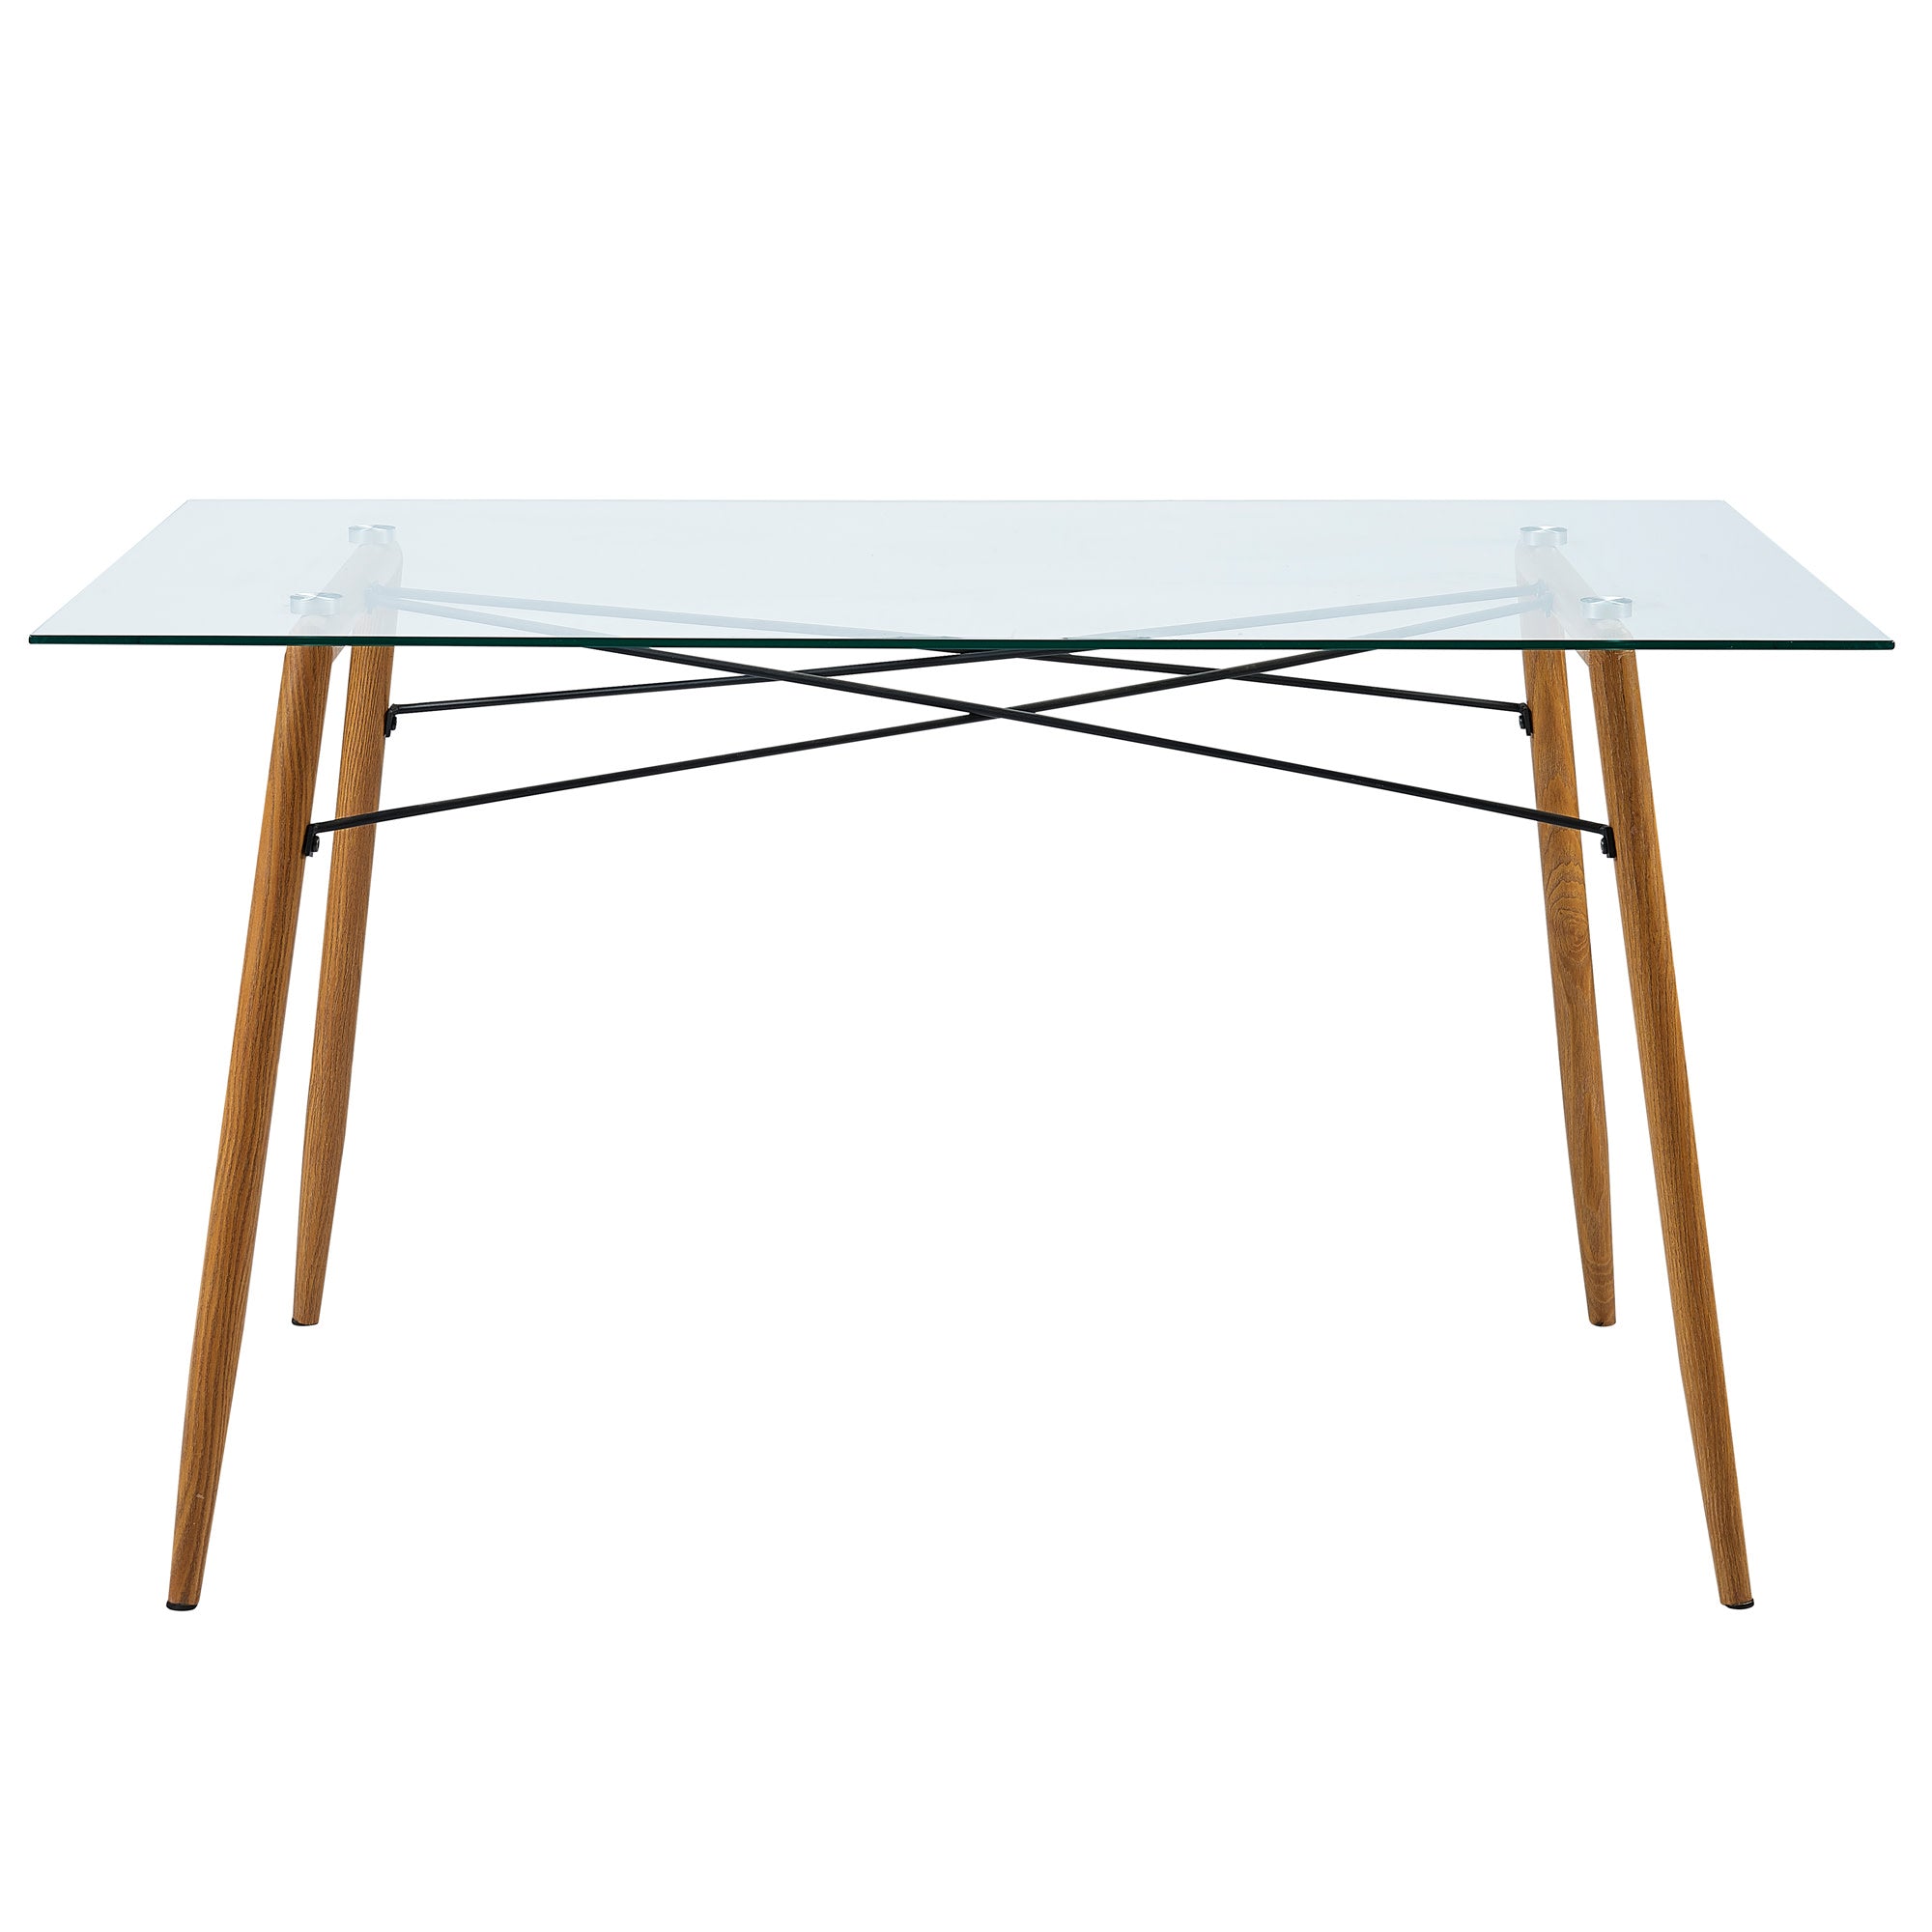 Teamson Home Minimalist Glass Top Dining Table with Wood Base, Natural